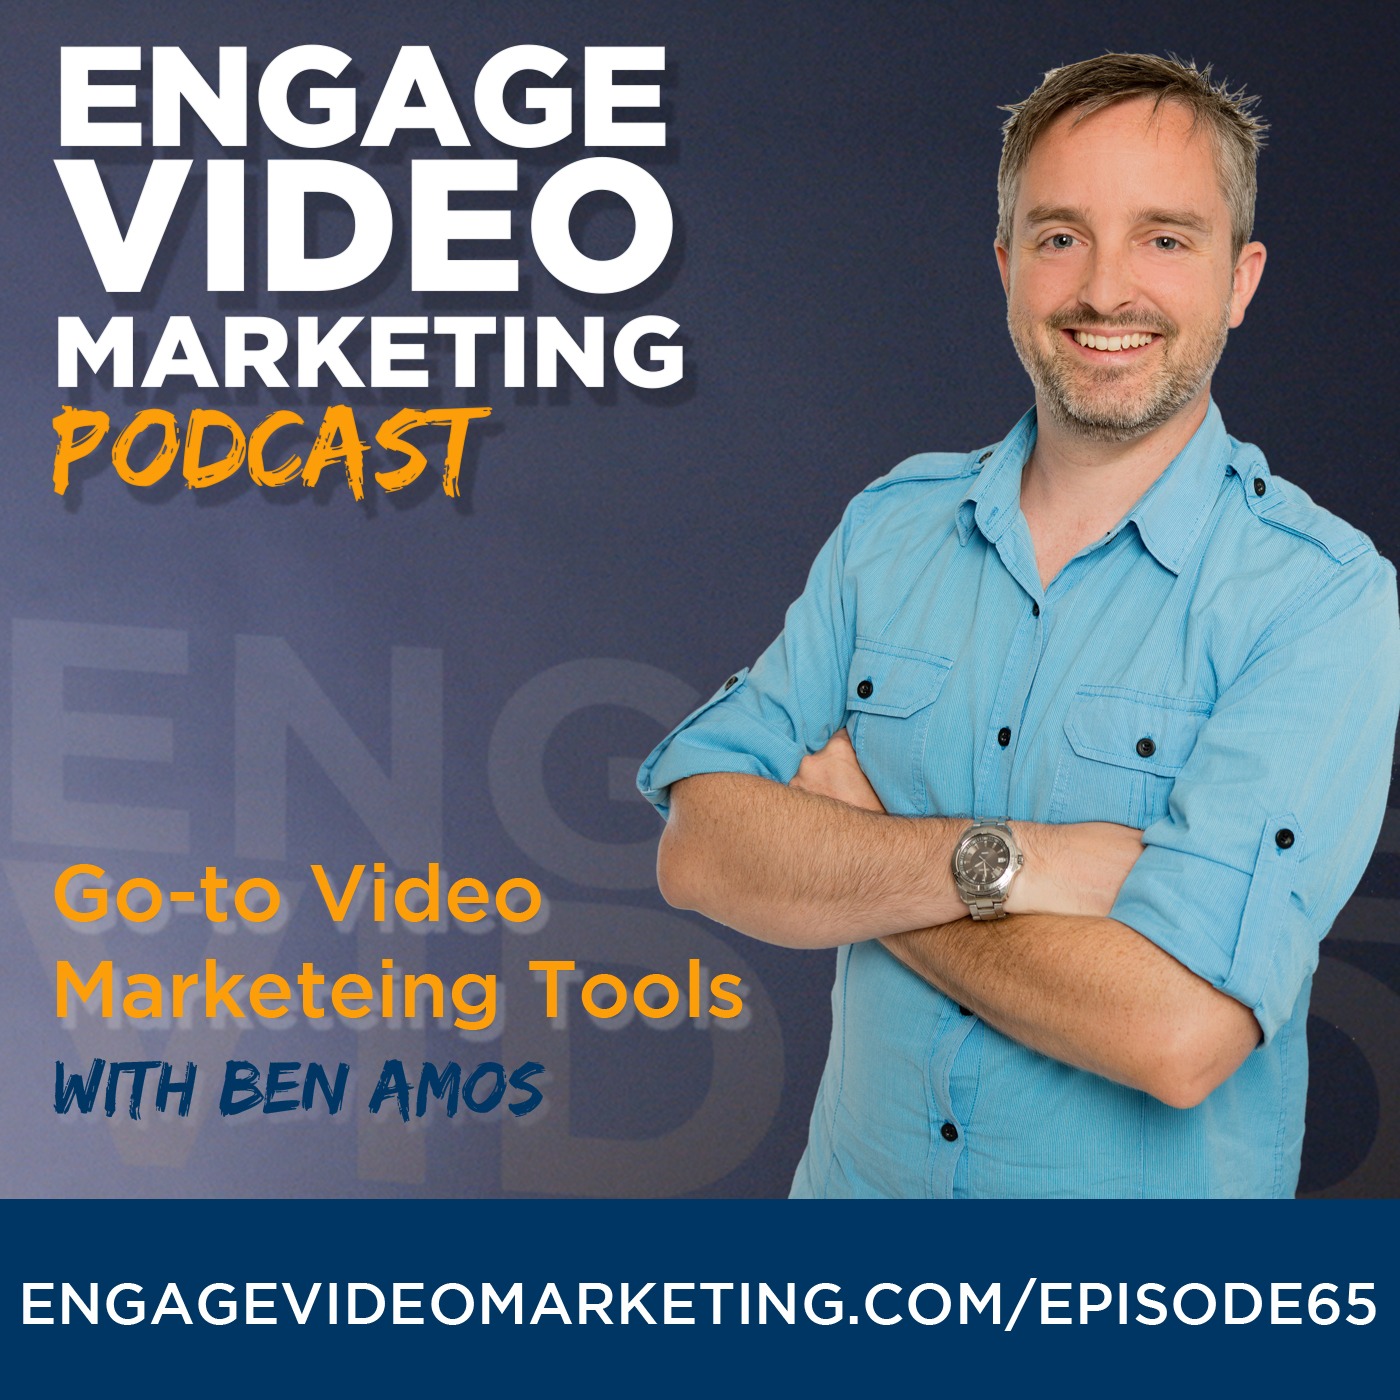 Go-to Video Marketing Tools